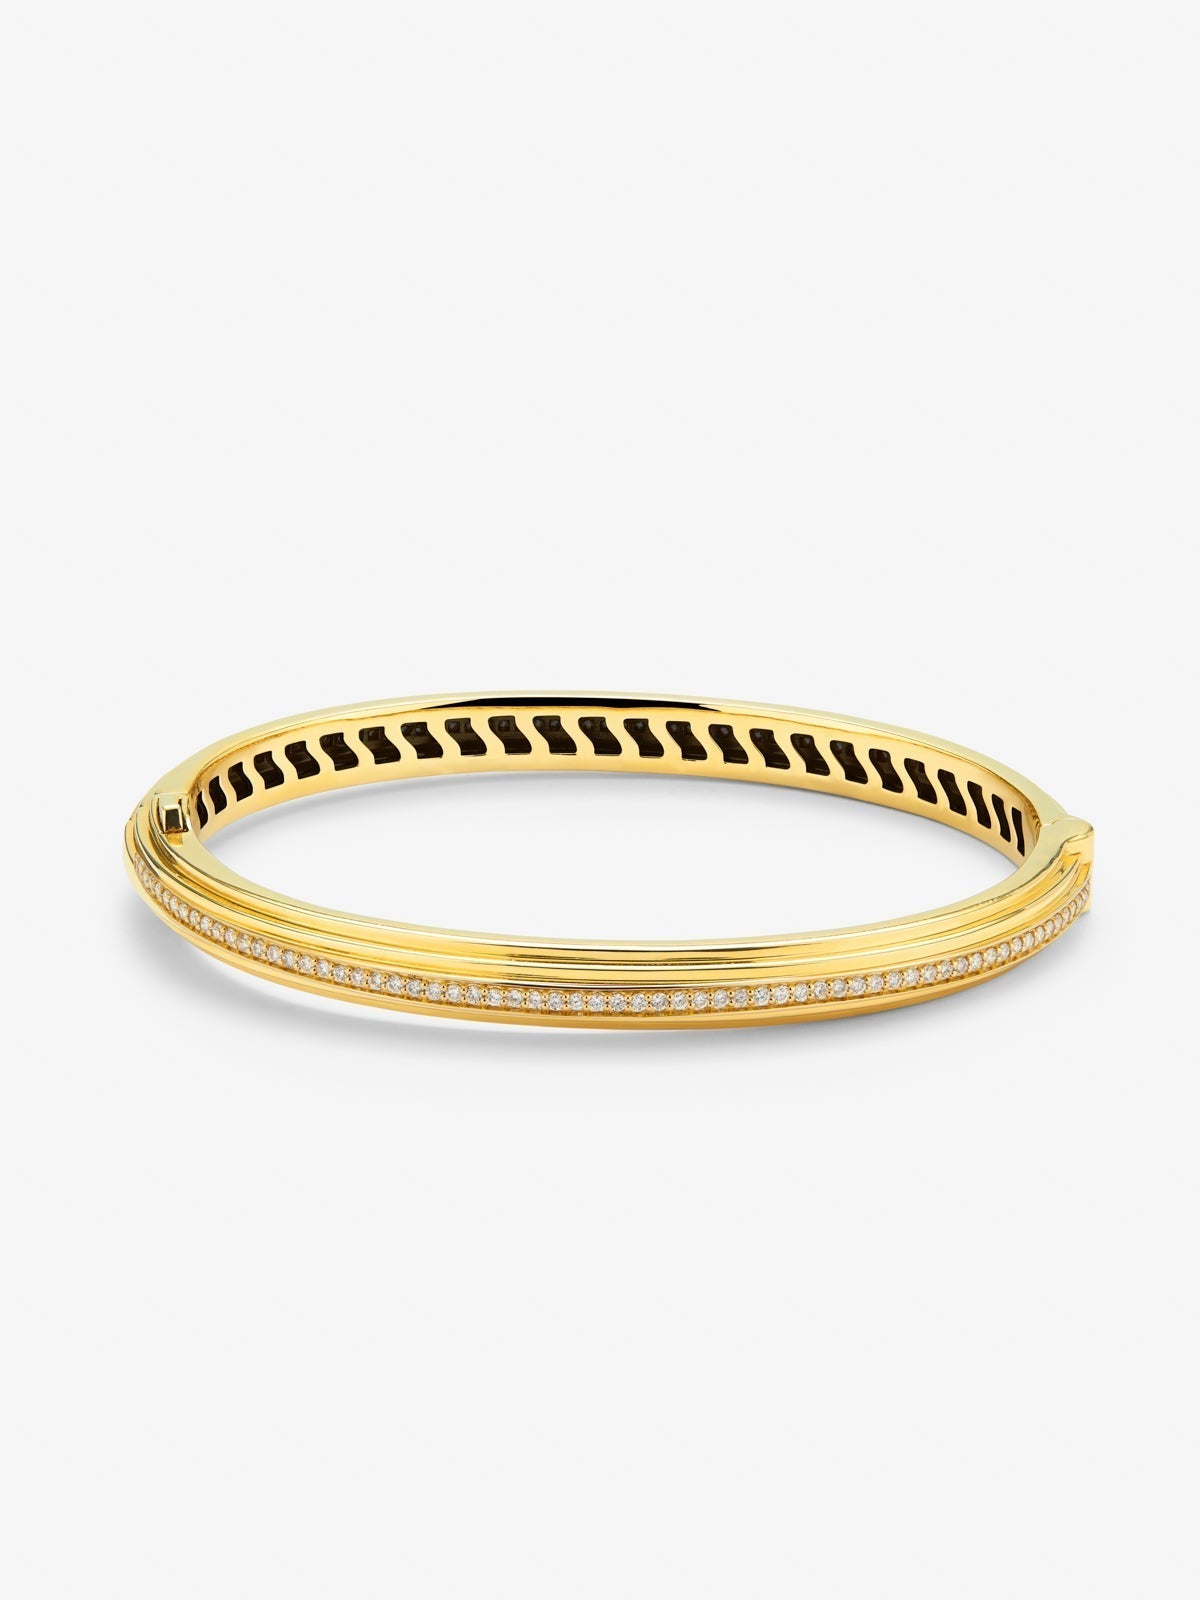 Rigid 18K yellow gold bracelet with 69 brilliant-cut diamonds with a total of 0.42 cts